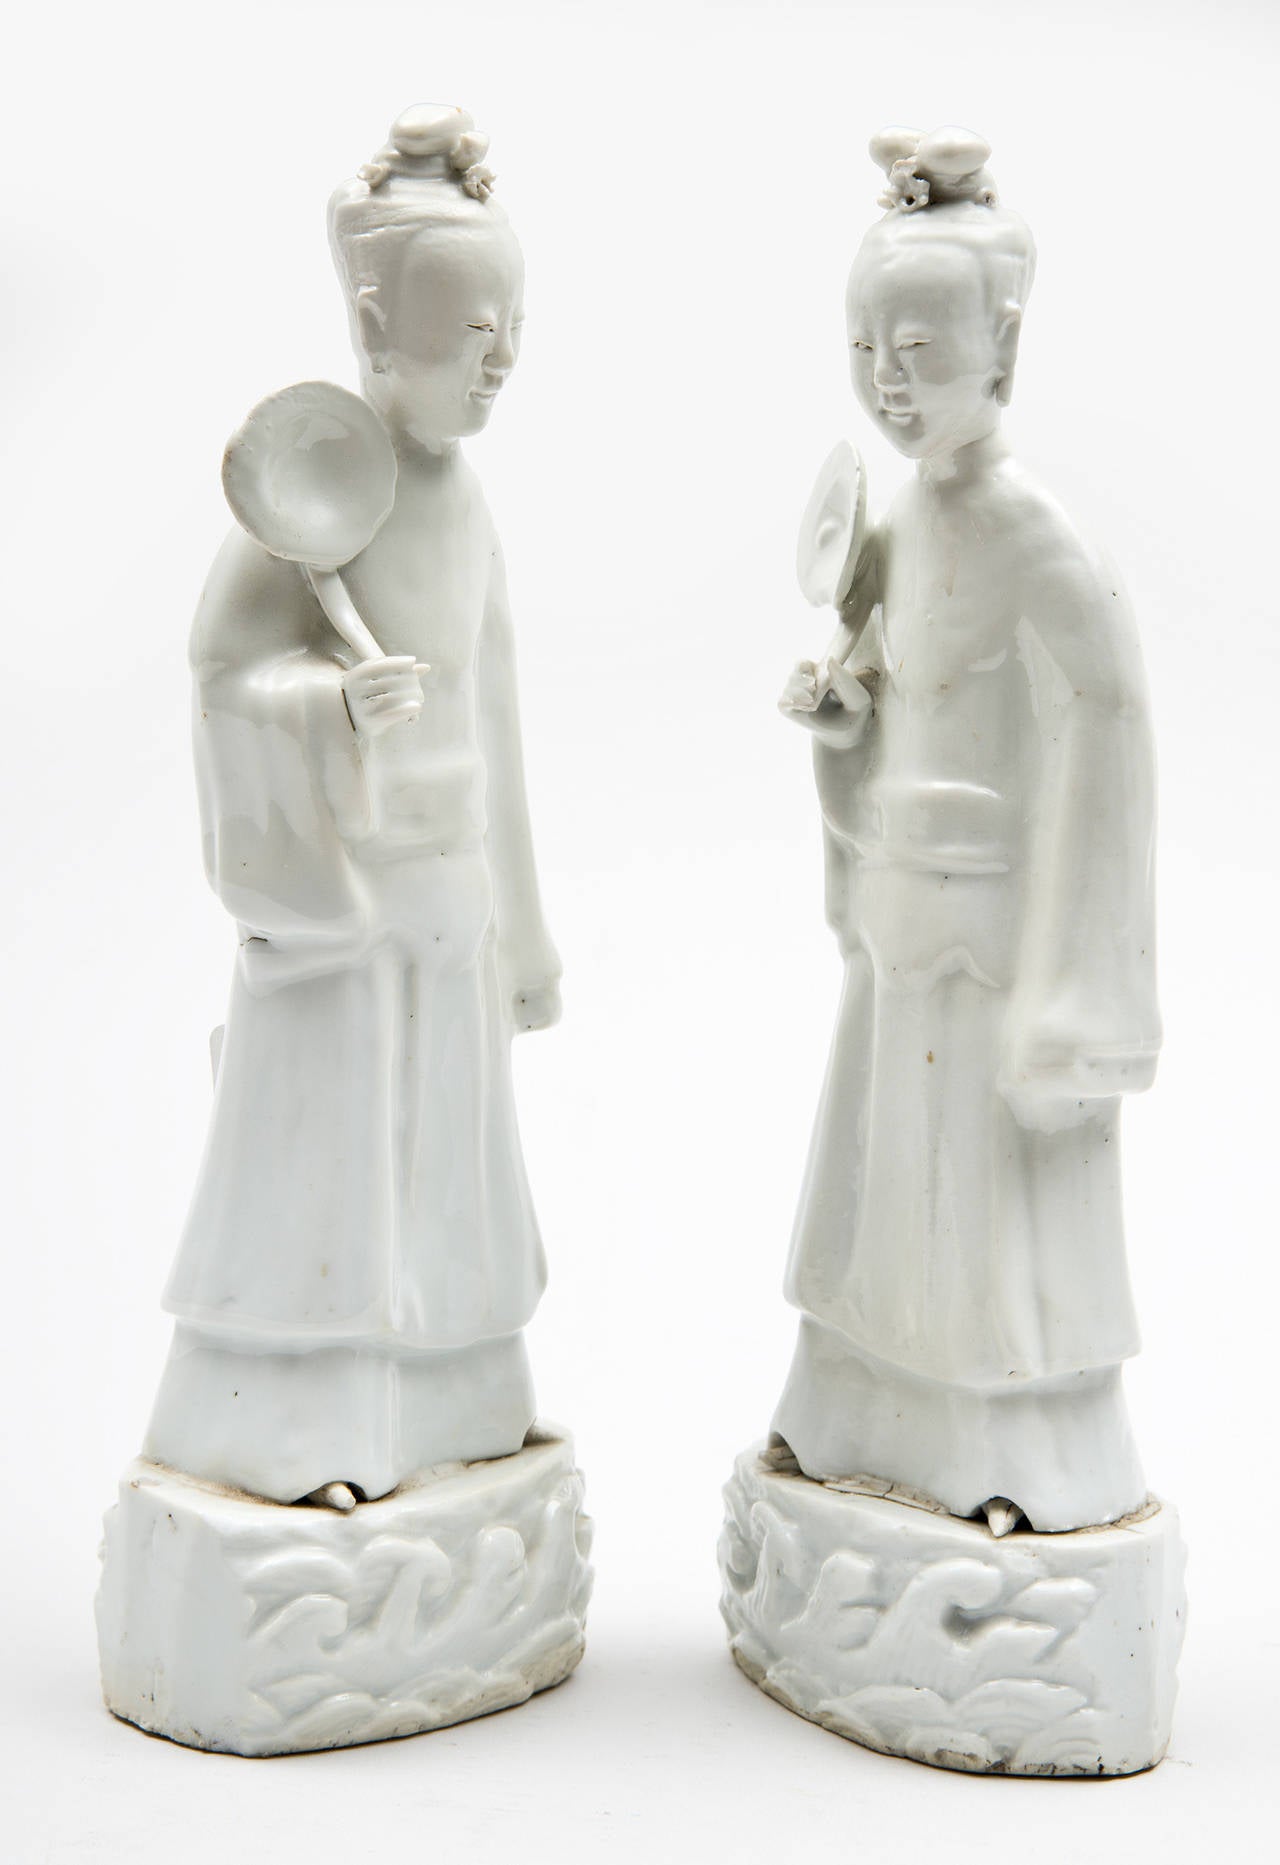 Chinese pair of blanc de chine porcelain female figures, possibly of Quan Yin, holding an open flower and wearing long robes standing on a base of waves of pond water. Some restoration.

Item #6332.